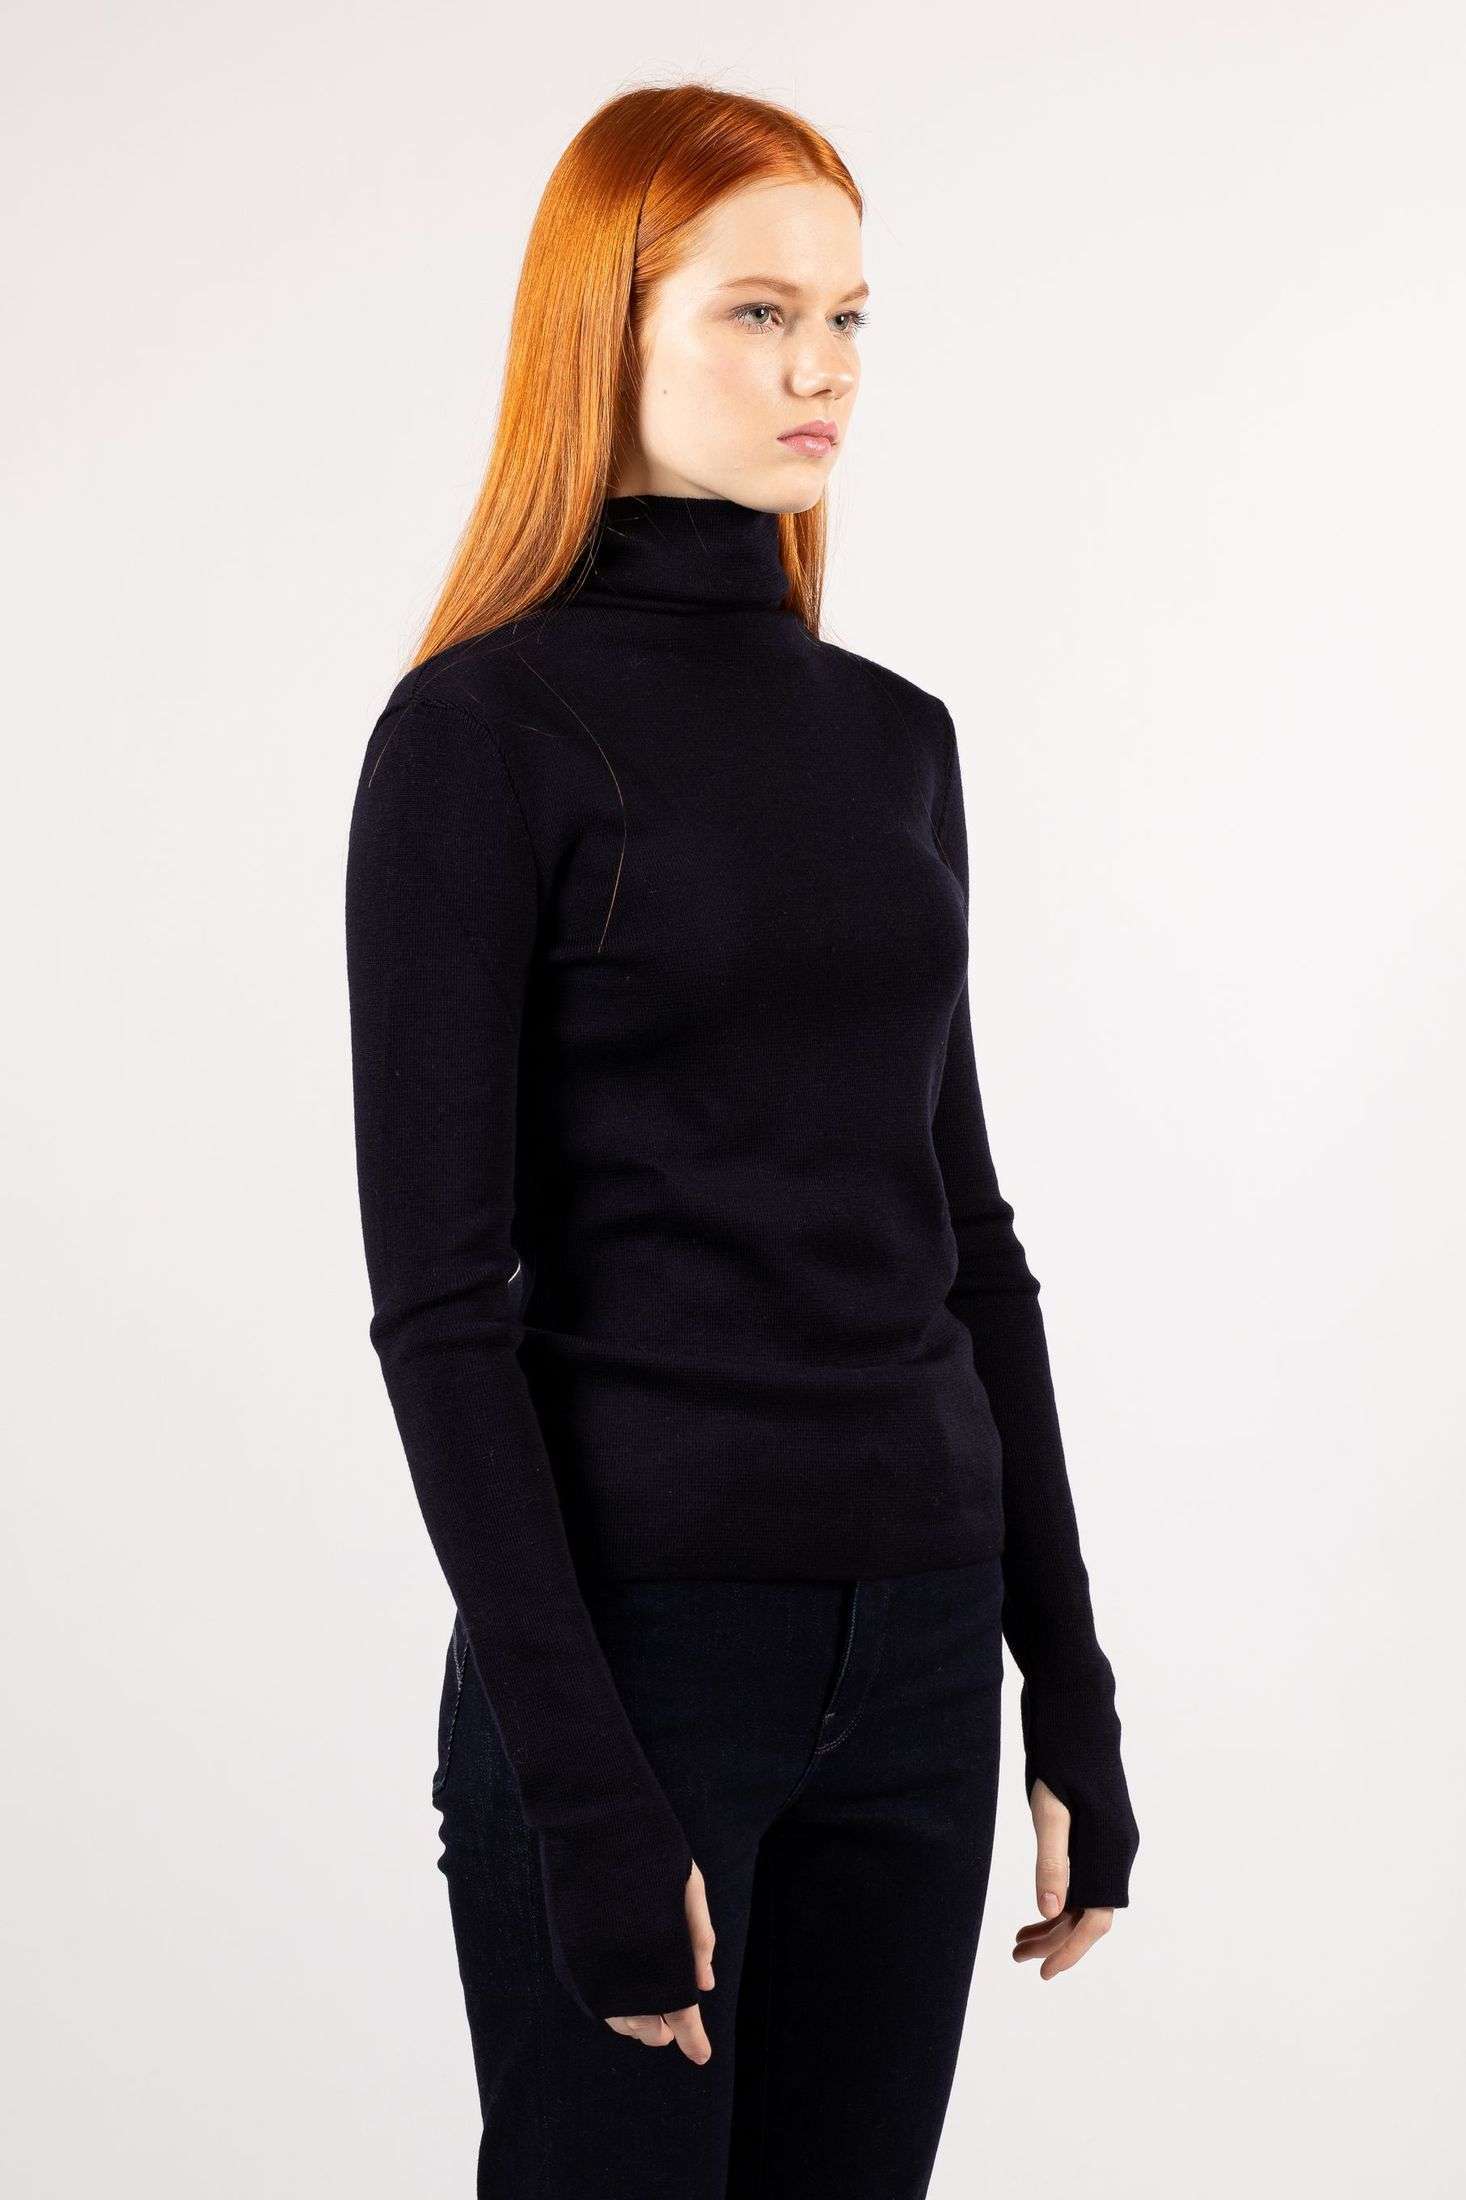 Witness a young woman showcasing style in the ADA fine knit turtleneck in a stunning navy shade.